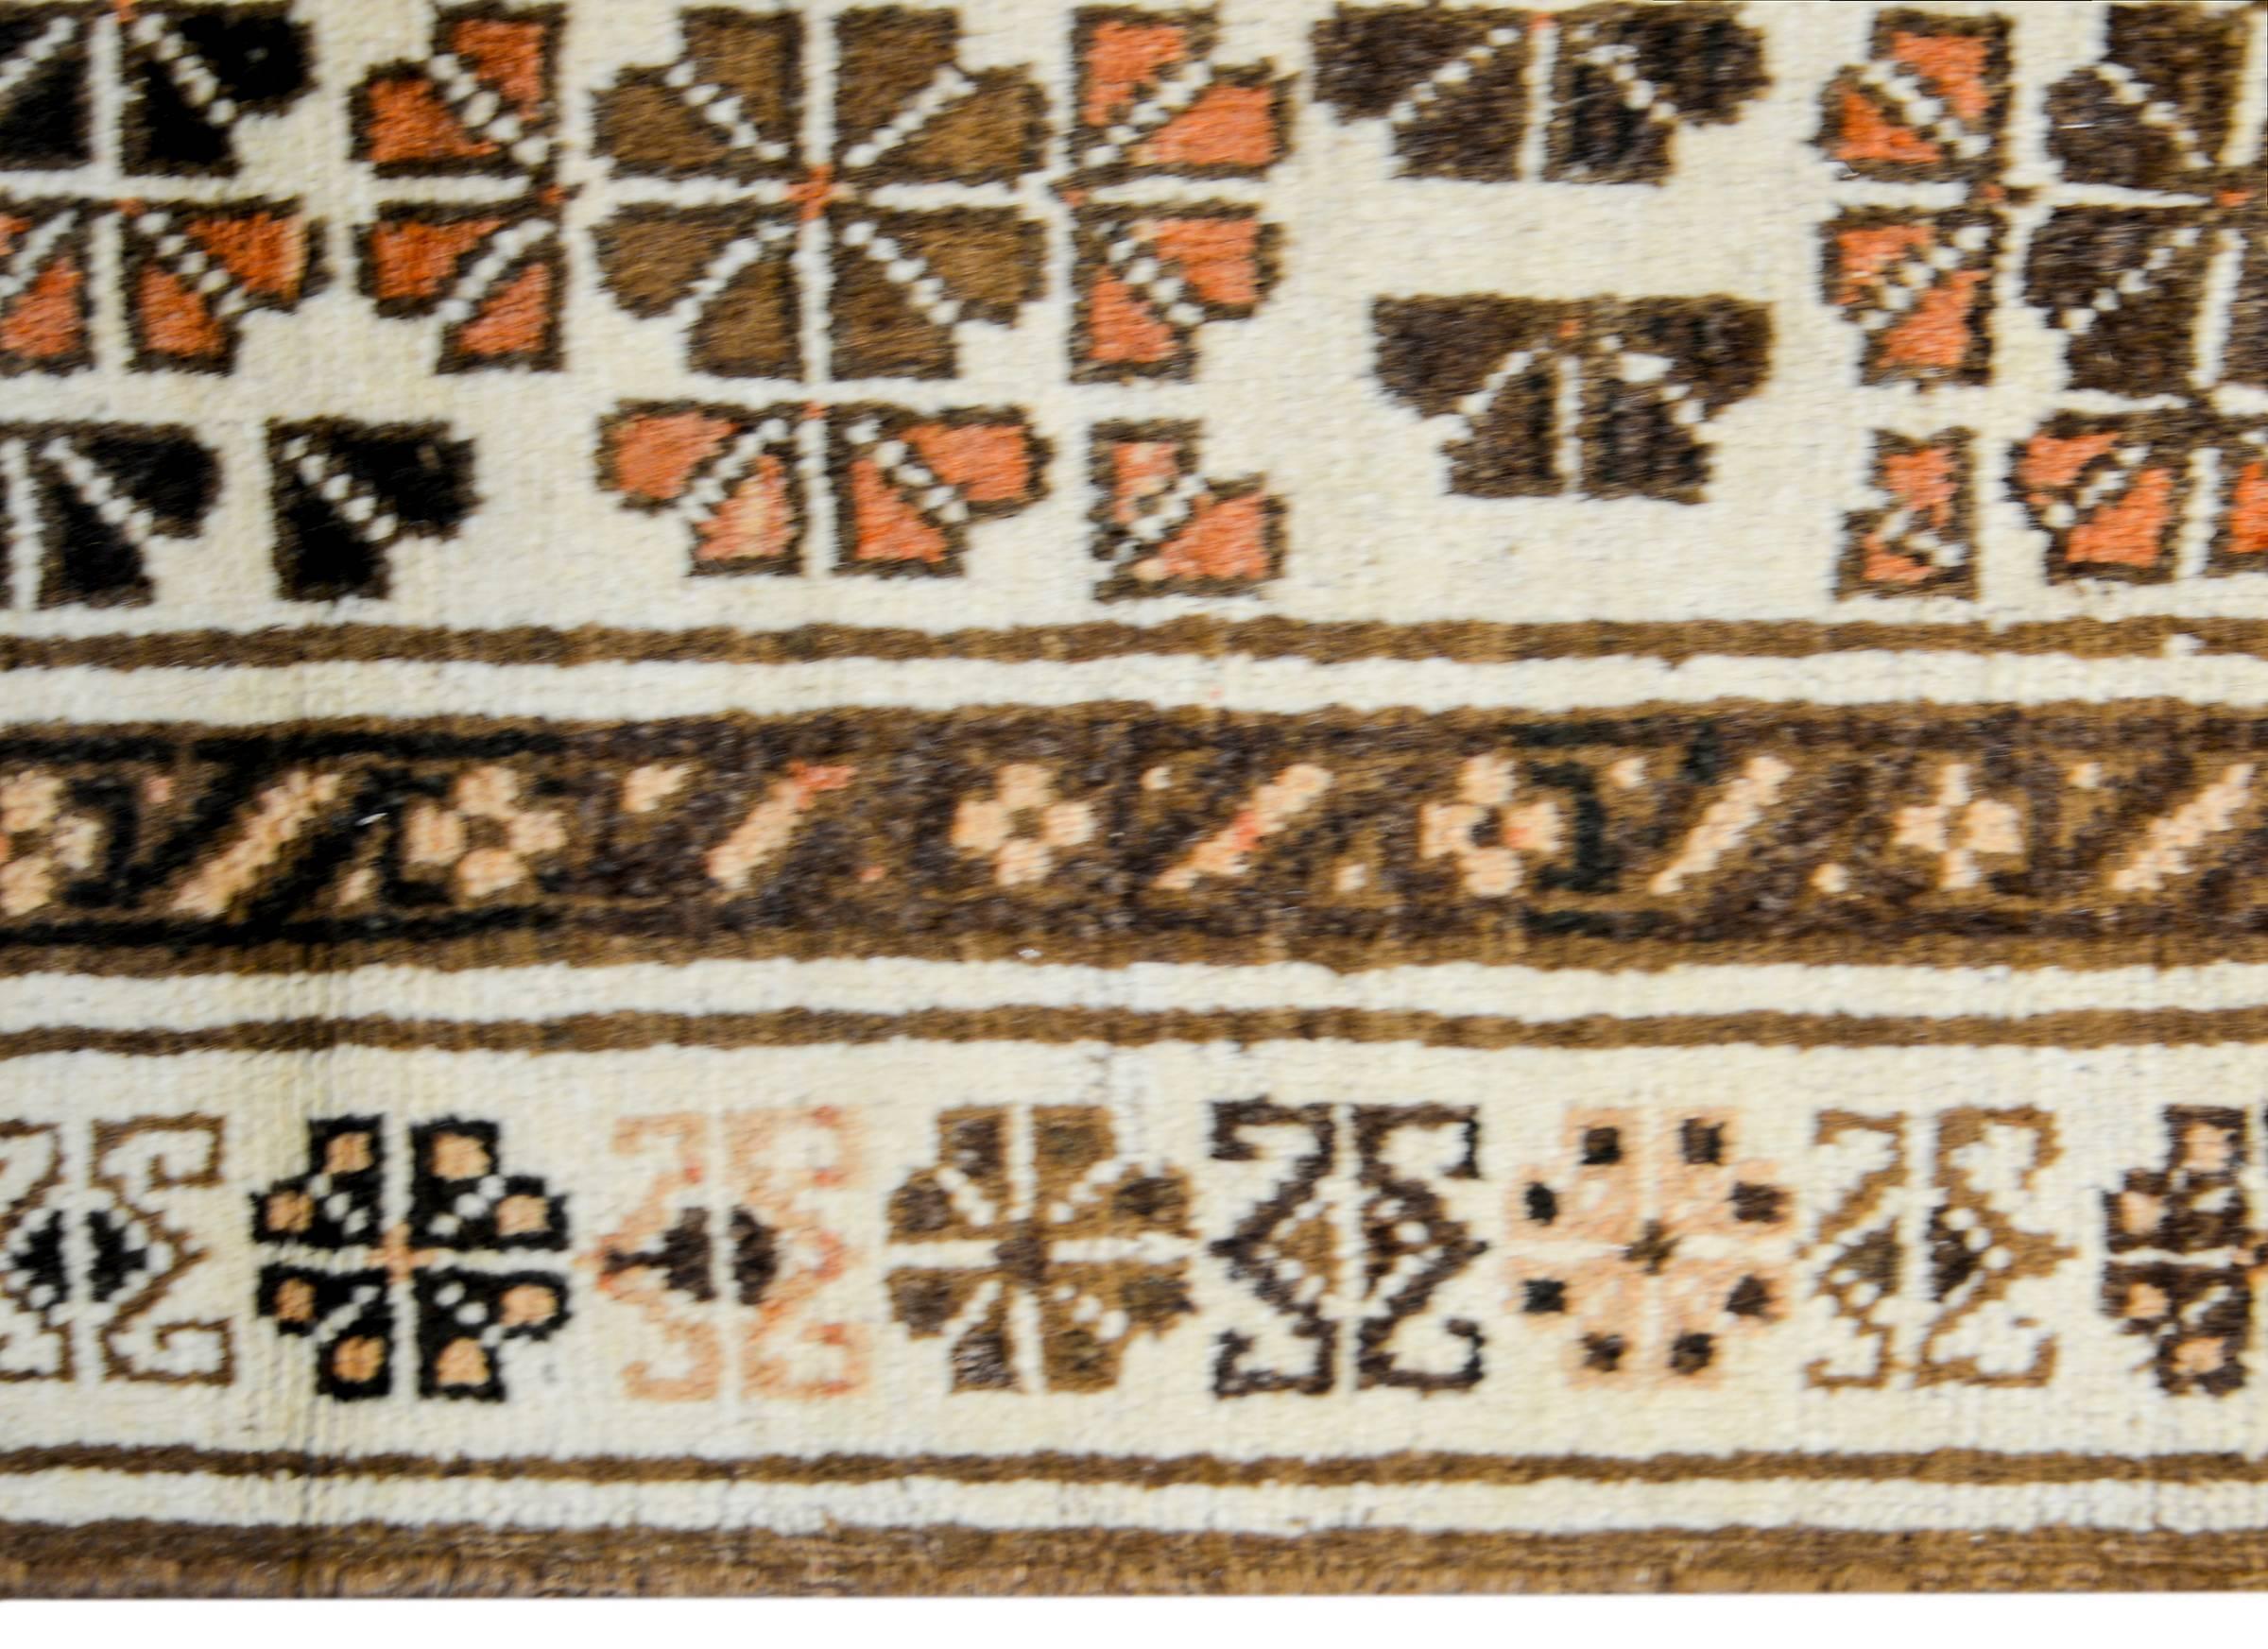 Vegetable Dyed Early 20th Century Baluch Prayer Rug For Sale